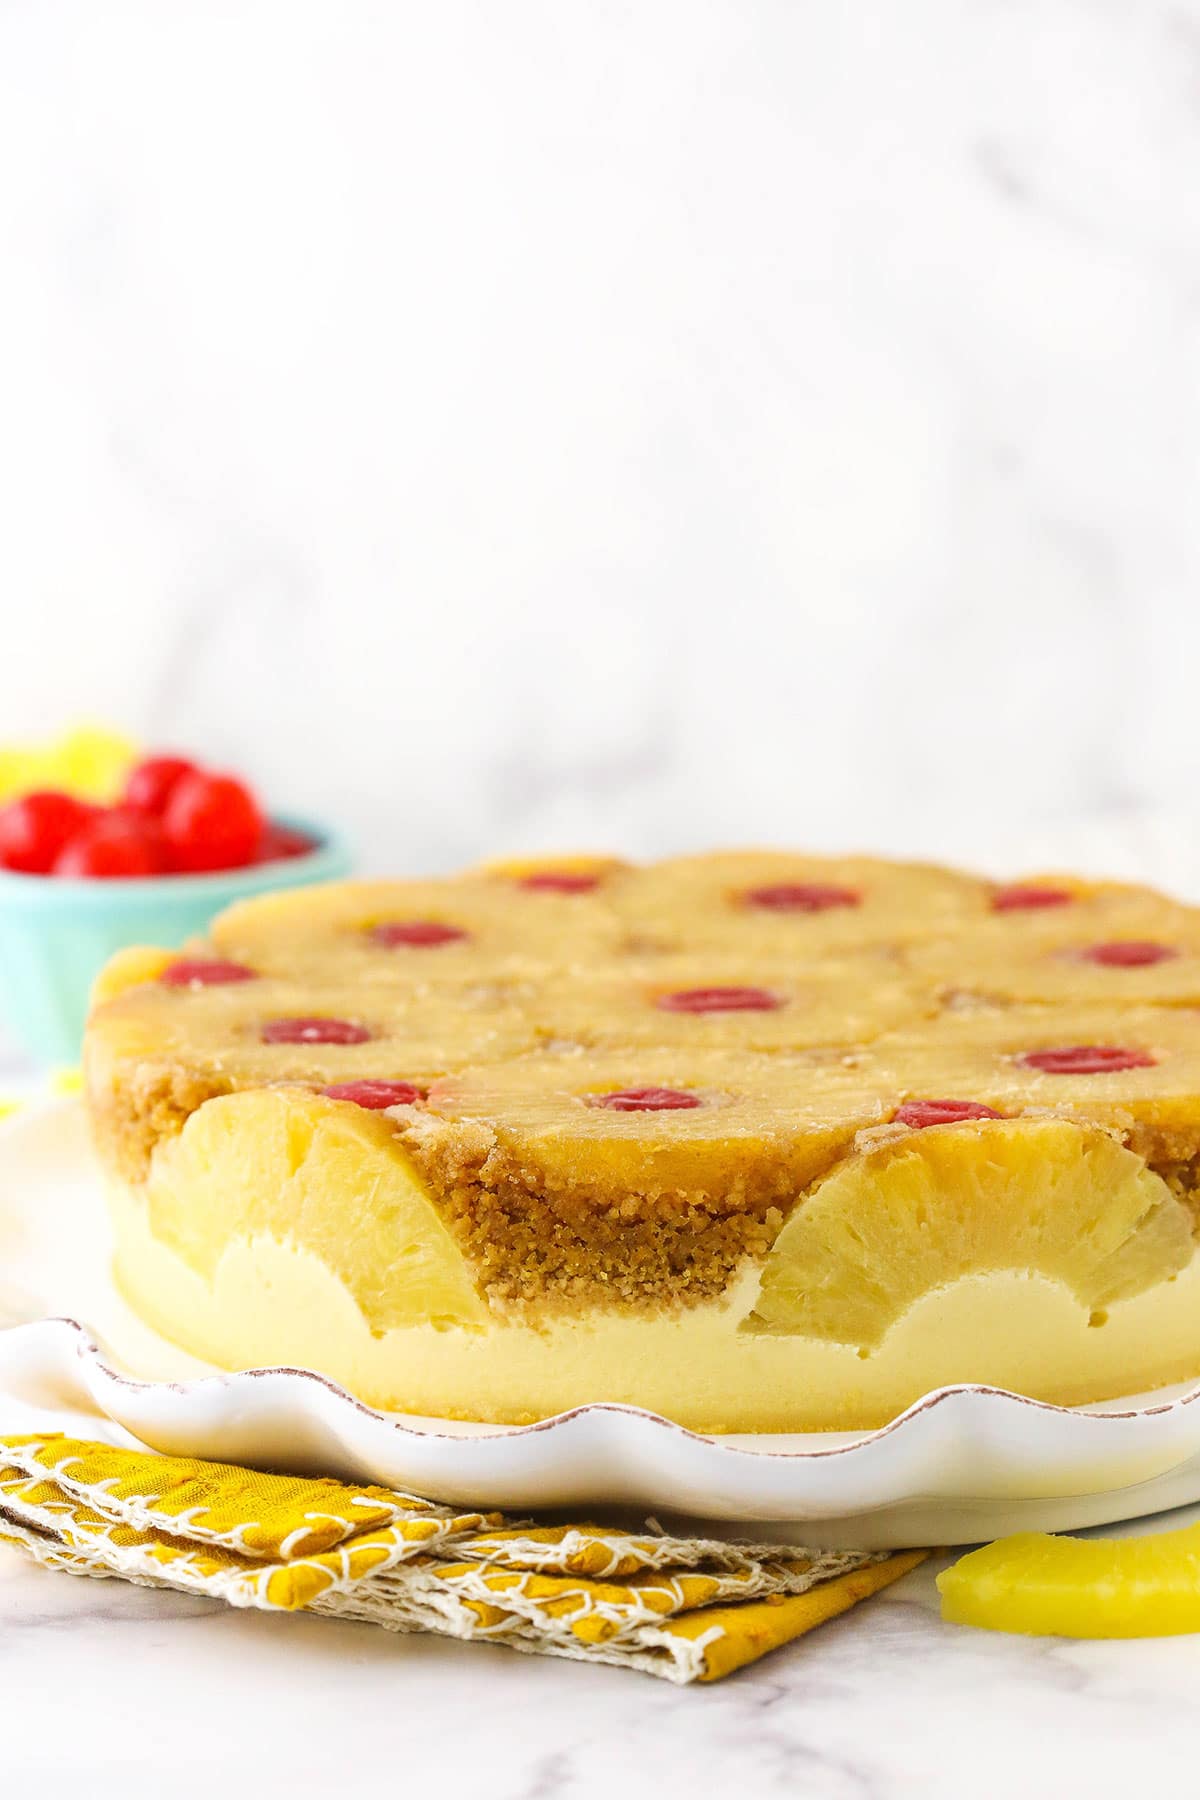 Side view of a pineapple cheesecake, showing the decorated sides.